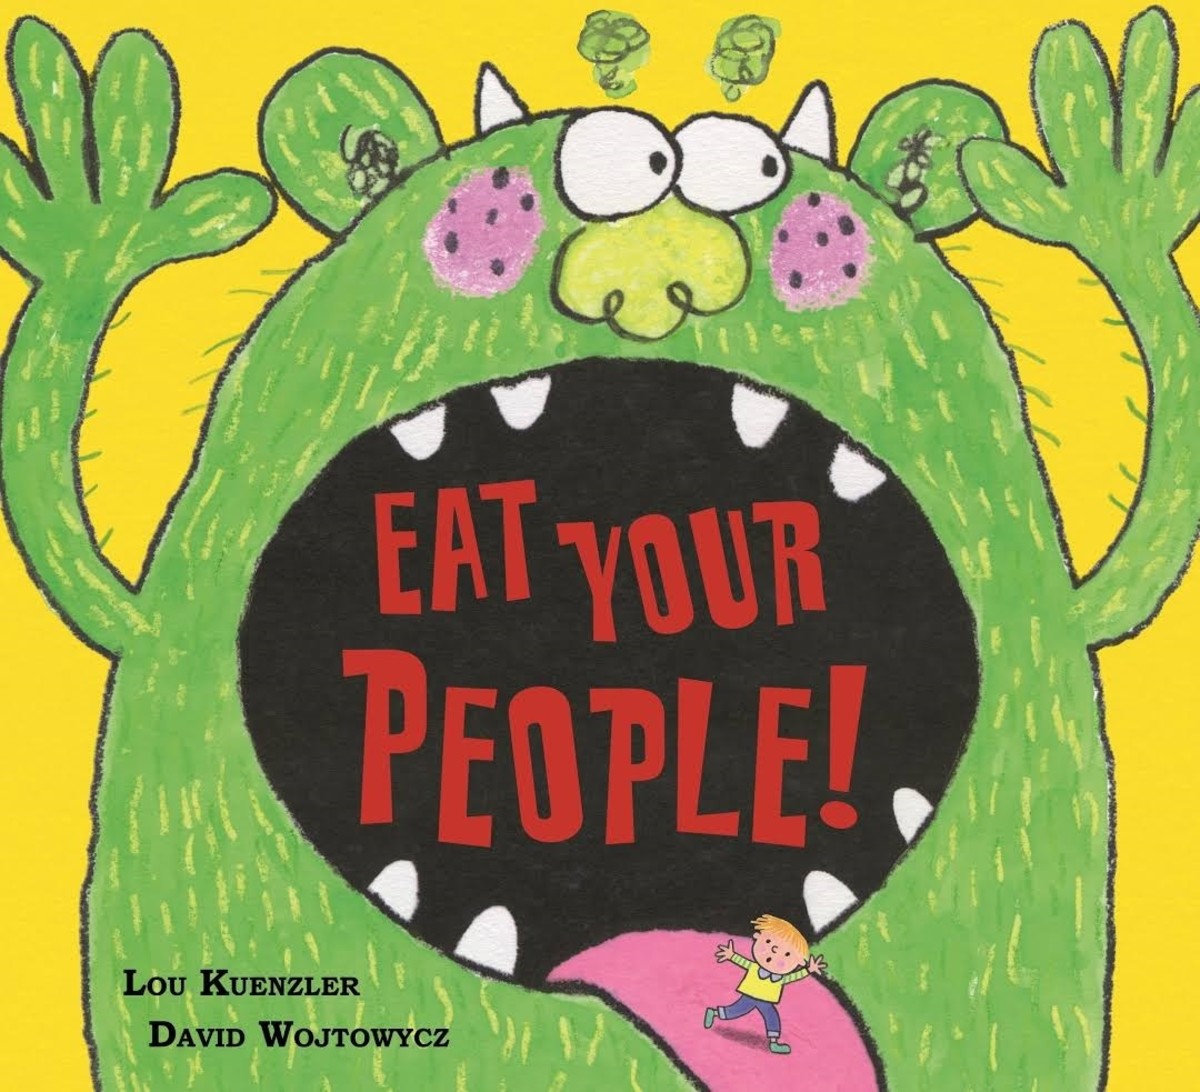 Eat Your People by Lou Kuenzler